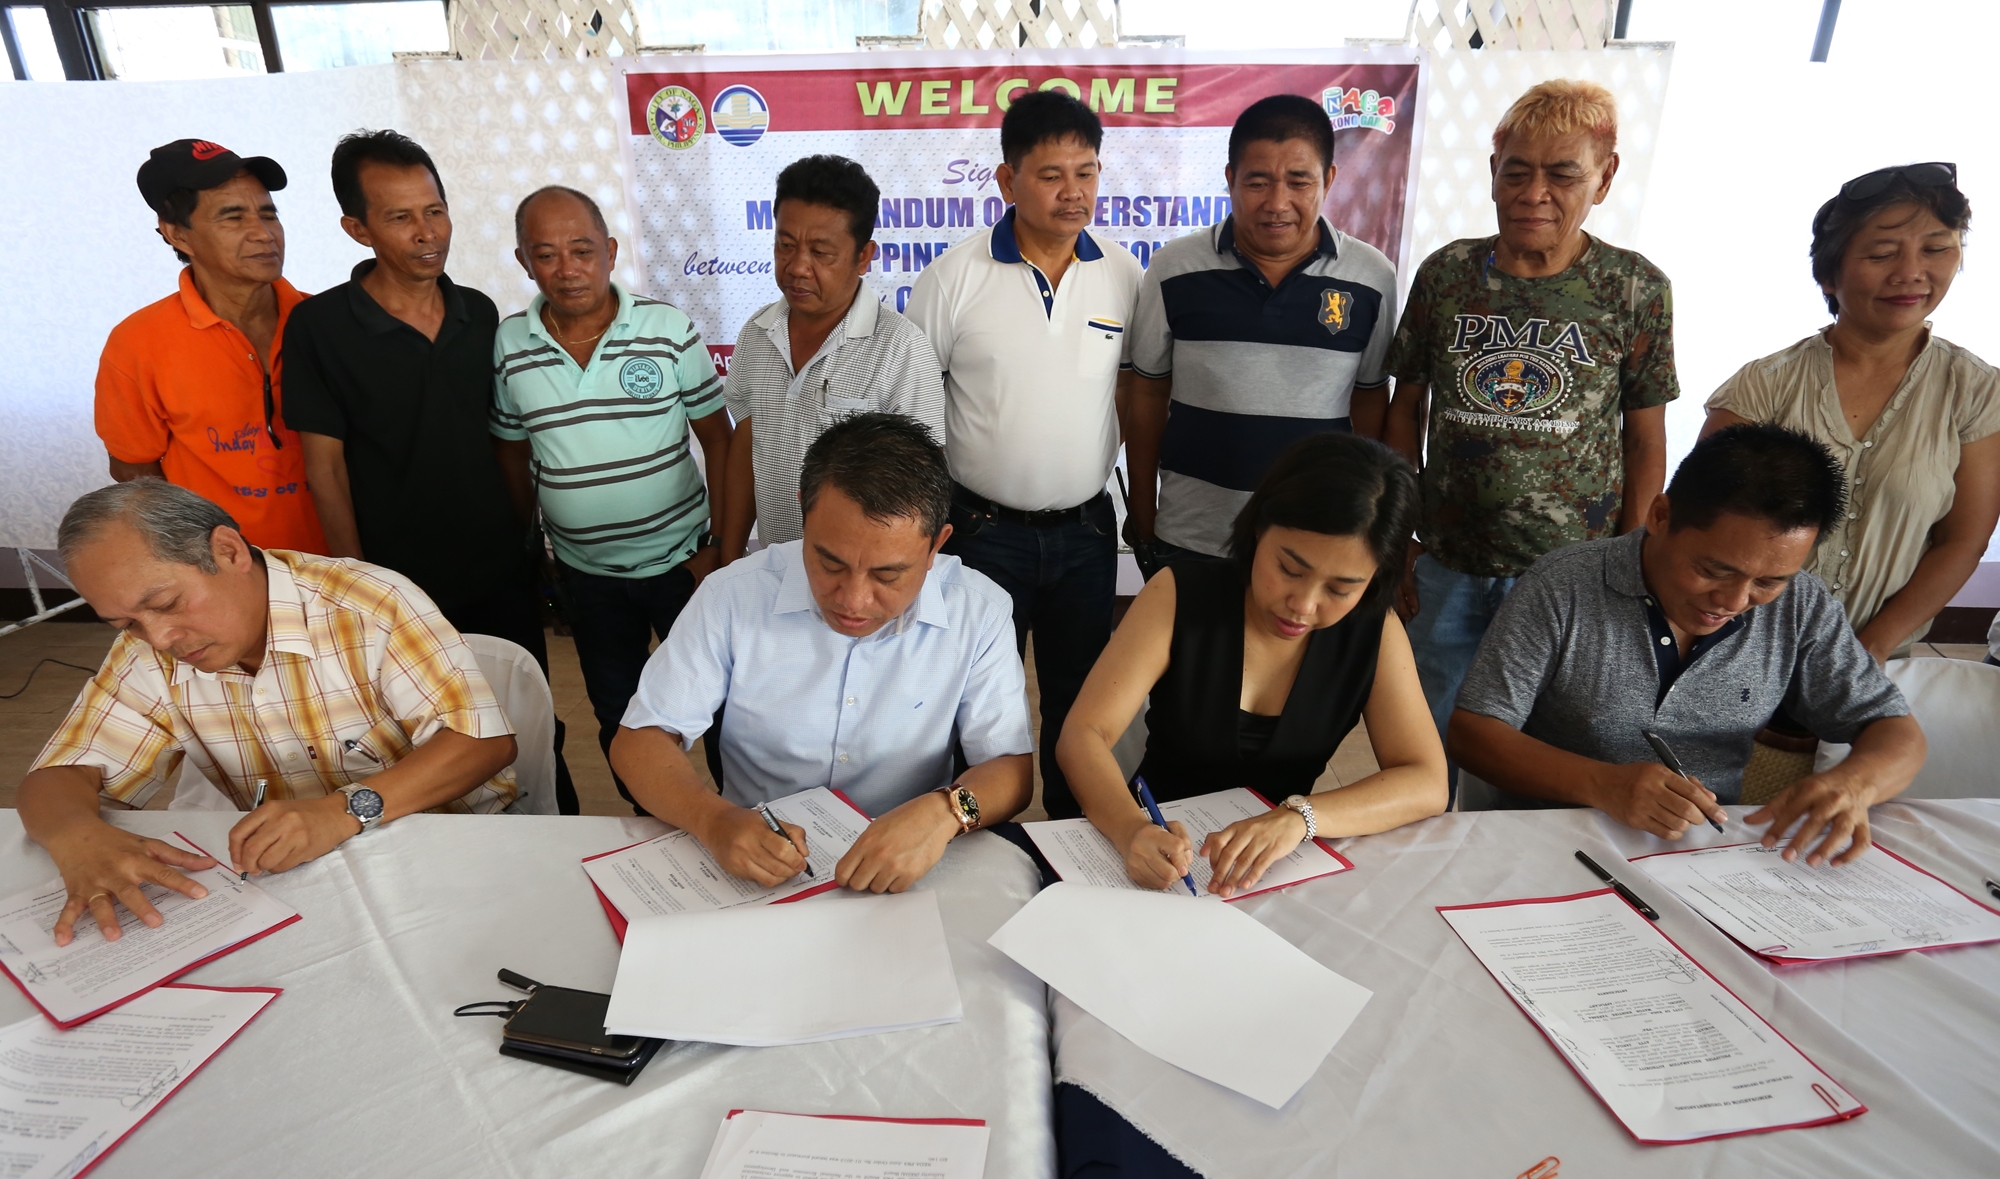 MOU SIGNING FOR NAGA CITY RECLAMATION/APRIL 21, 2017: Naga City mayor Kristine Vanessa T. Chiong (seated 2nd from right) with Atty. Janilo E. Rubiato (seated 2nd from left) CEO/general Manager Philippine Reclamation Authority Engr. Diomedes M. Tan (left) PRA, department manager and Engr. Arthur S. Villamor (right) Naga City administrator signing the Memorandom of Understanding (MOU) for the 146 hectar reclamation project in Naga City witness by some barangay captains.(CDN PHOTO/JUNJIE MENDOZA)